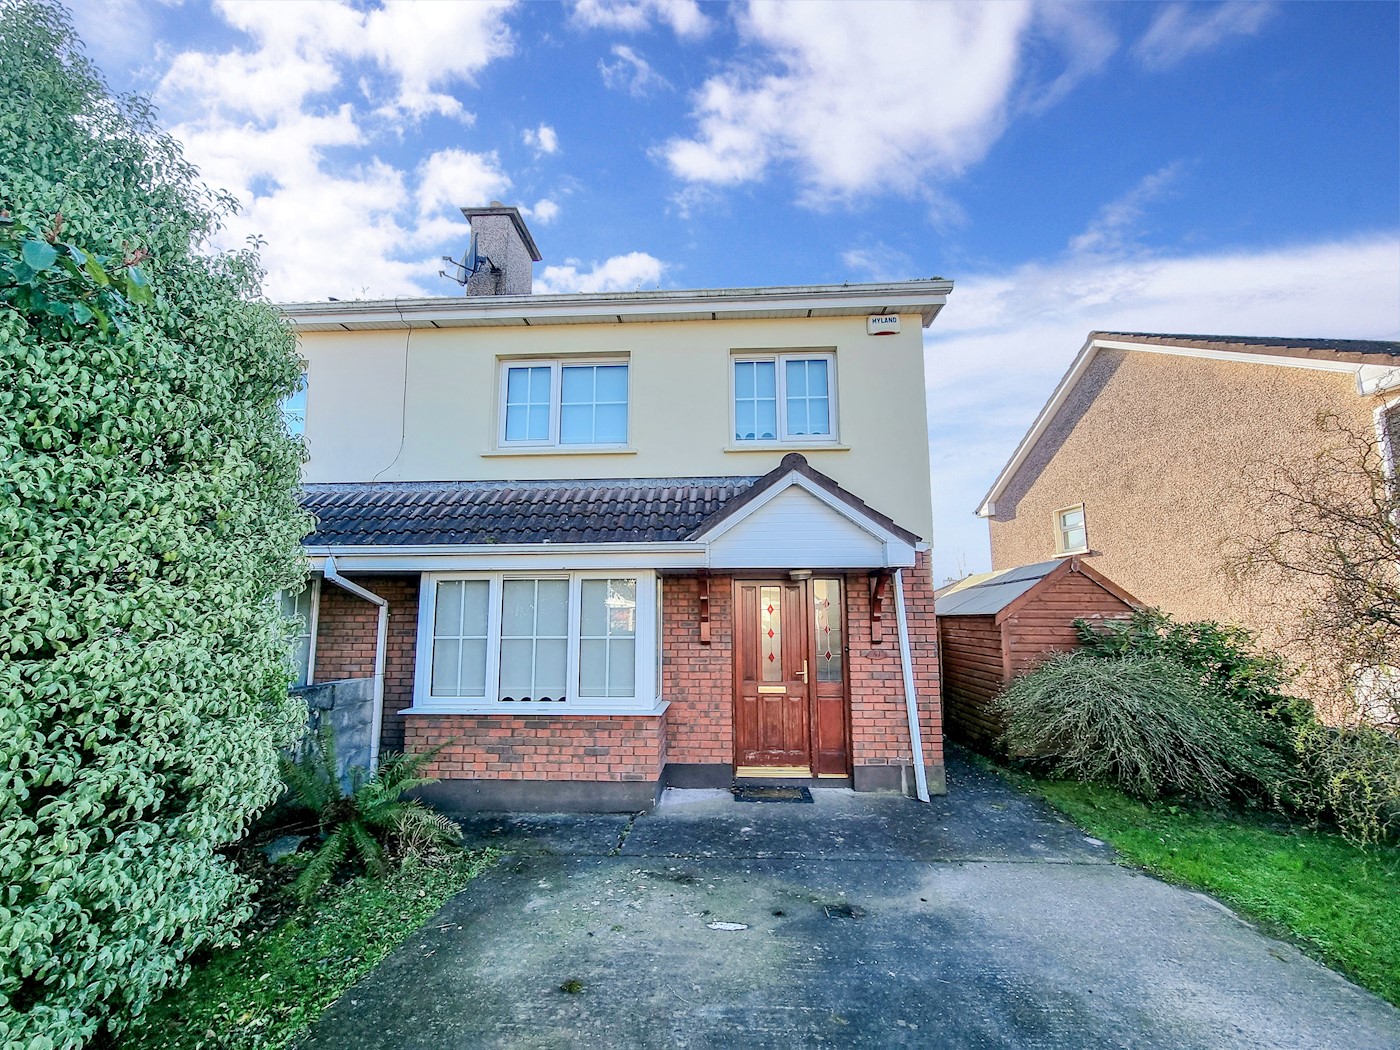 41 Oldcourt, Greenfield, Ballincollig, Co. Cork, P31 D263 1/42